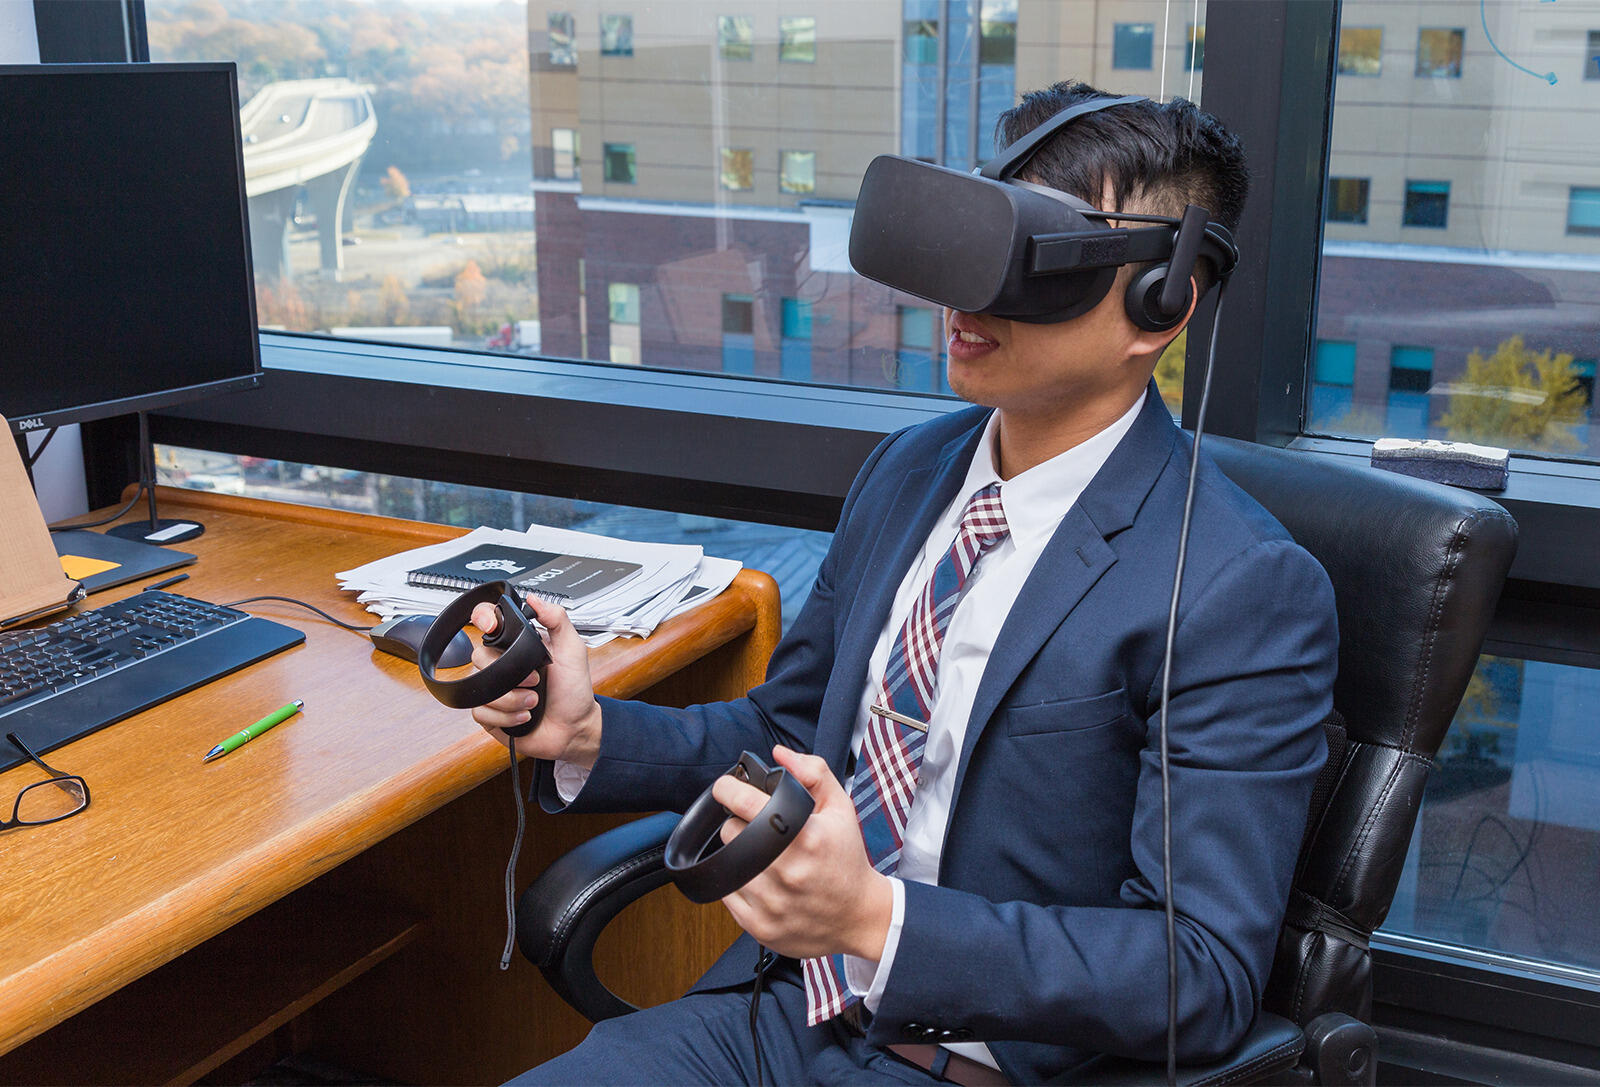 David Vu’s app, AnyWear VR, is meant to help reduce anxiety for children with autism spectrum disorder and make them more comfortable in healthcare situations. <br>Courtesy photo